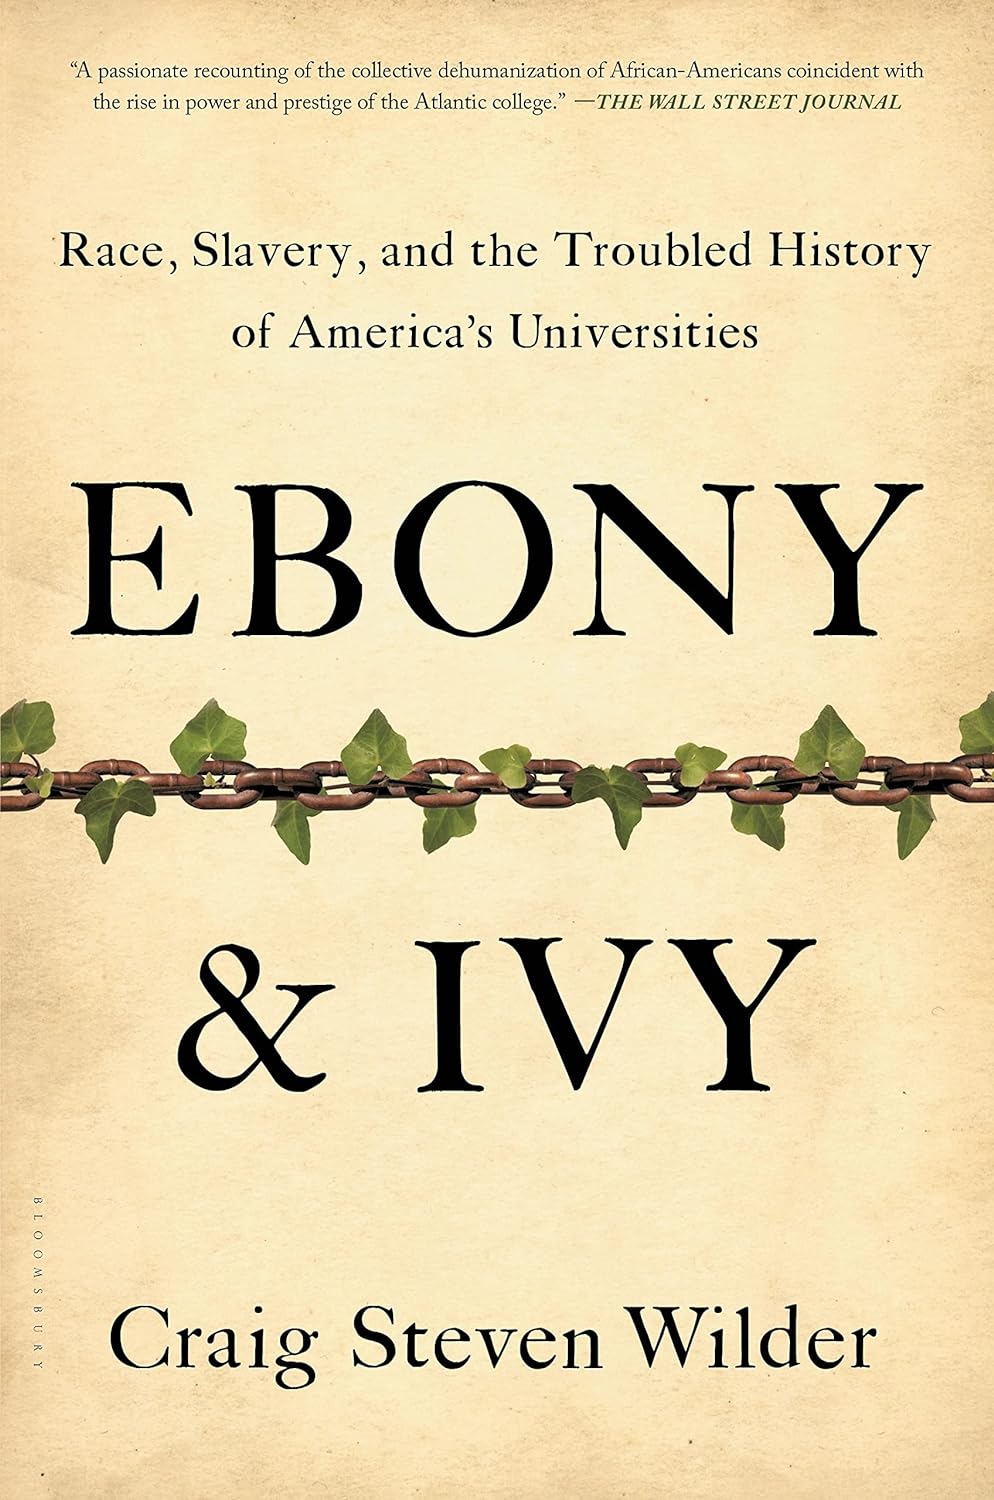 Ebony and Ivy // Race, Slavery, and the Troubled History of America's Universities